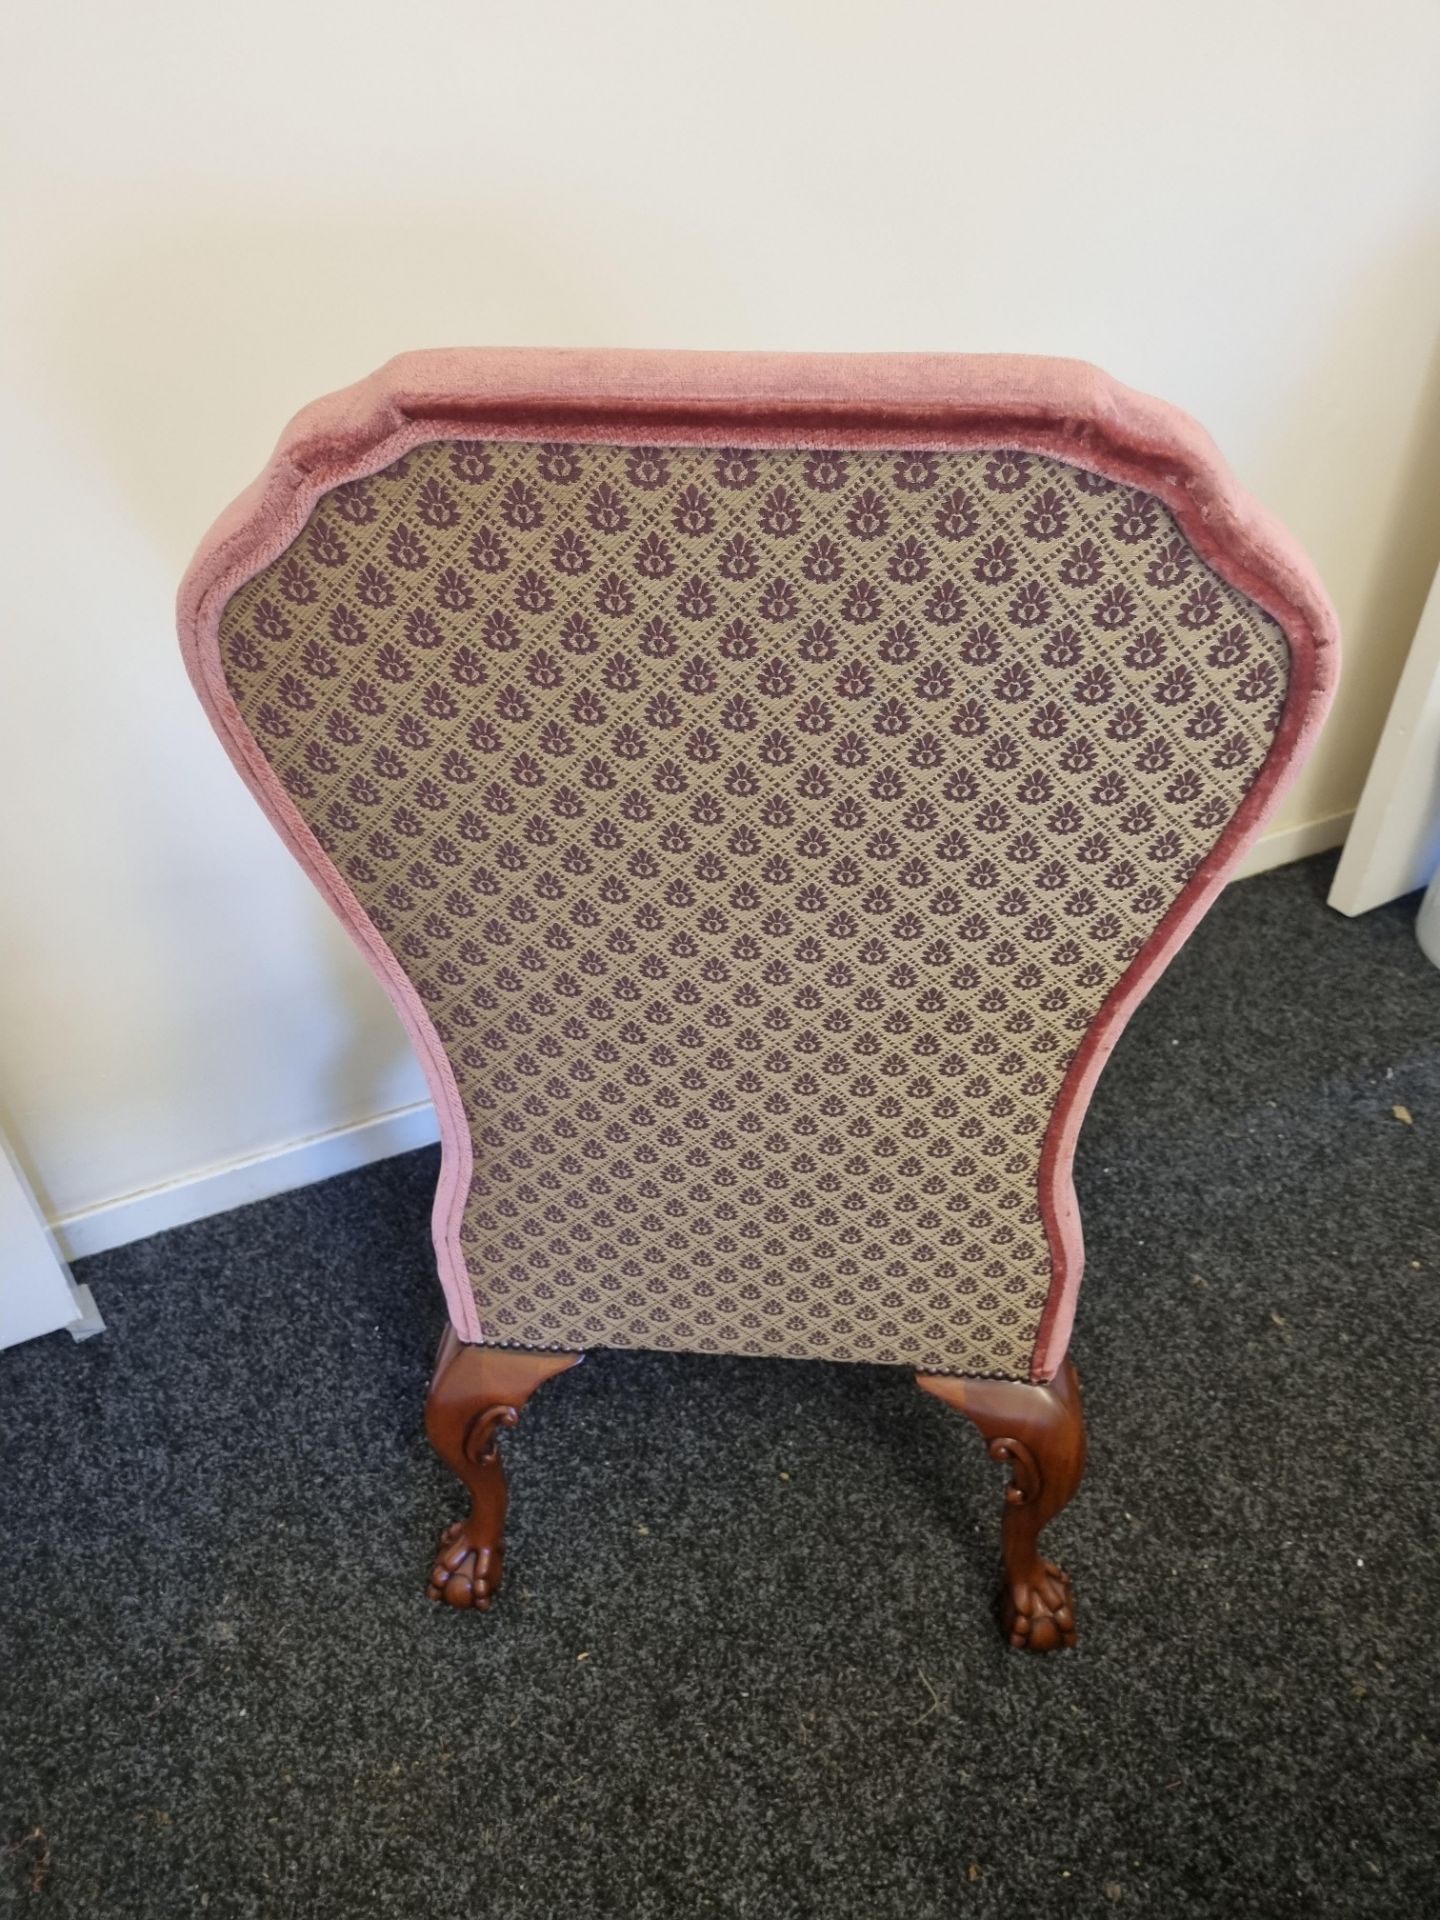 4 X Arthur Brett High Back Chairs Upholstered In Pink Velour With Studded Detail On Mahogany Claw - Image 5 of 5